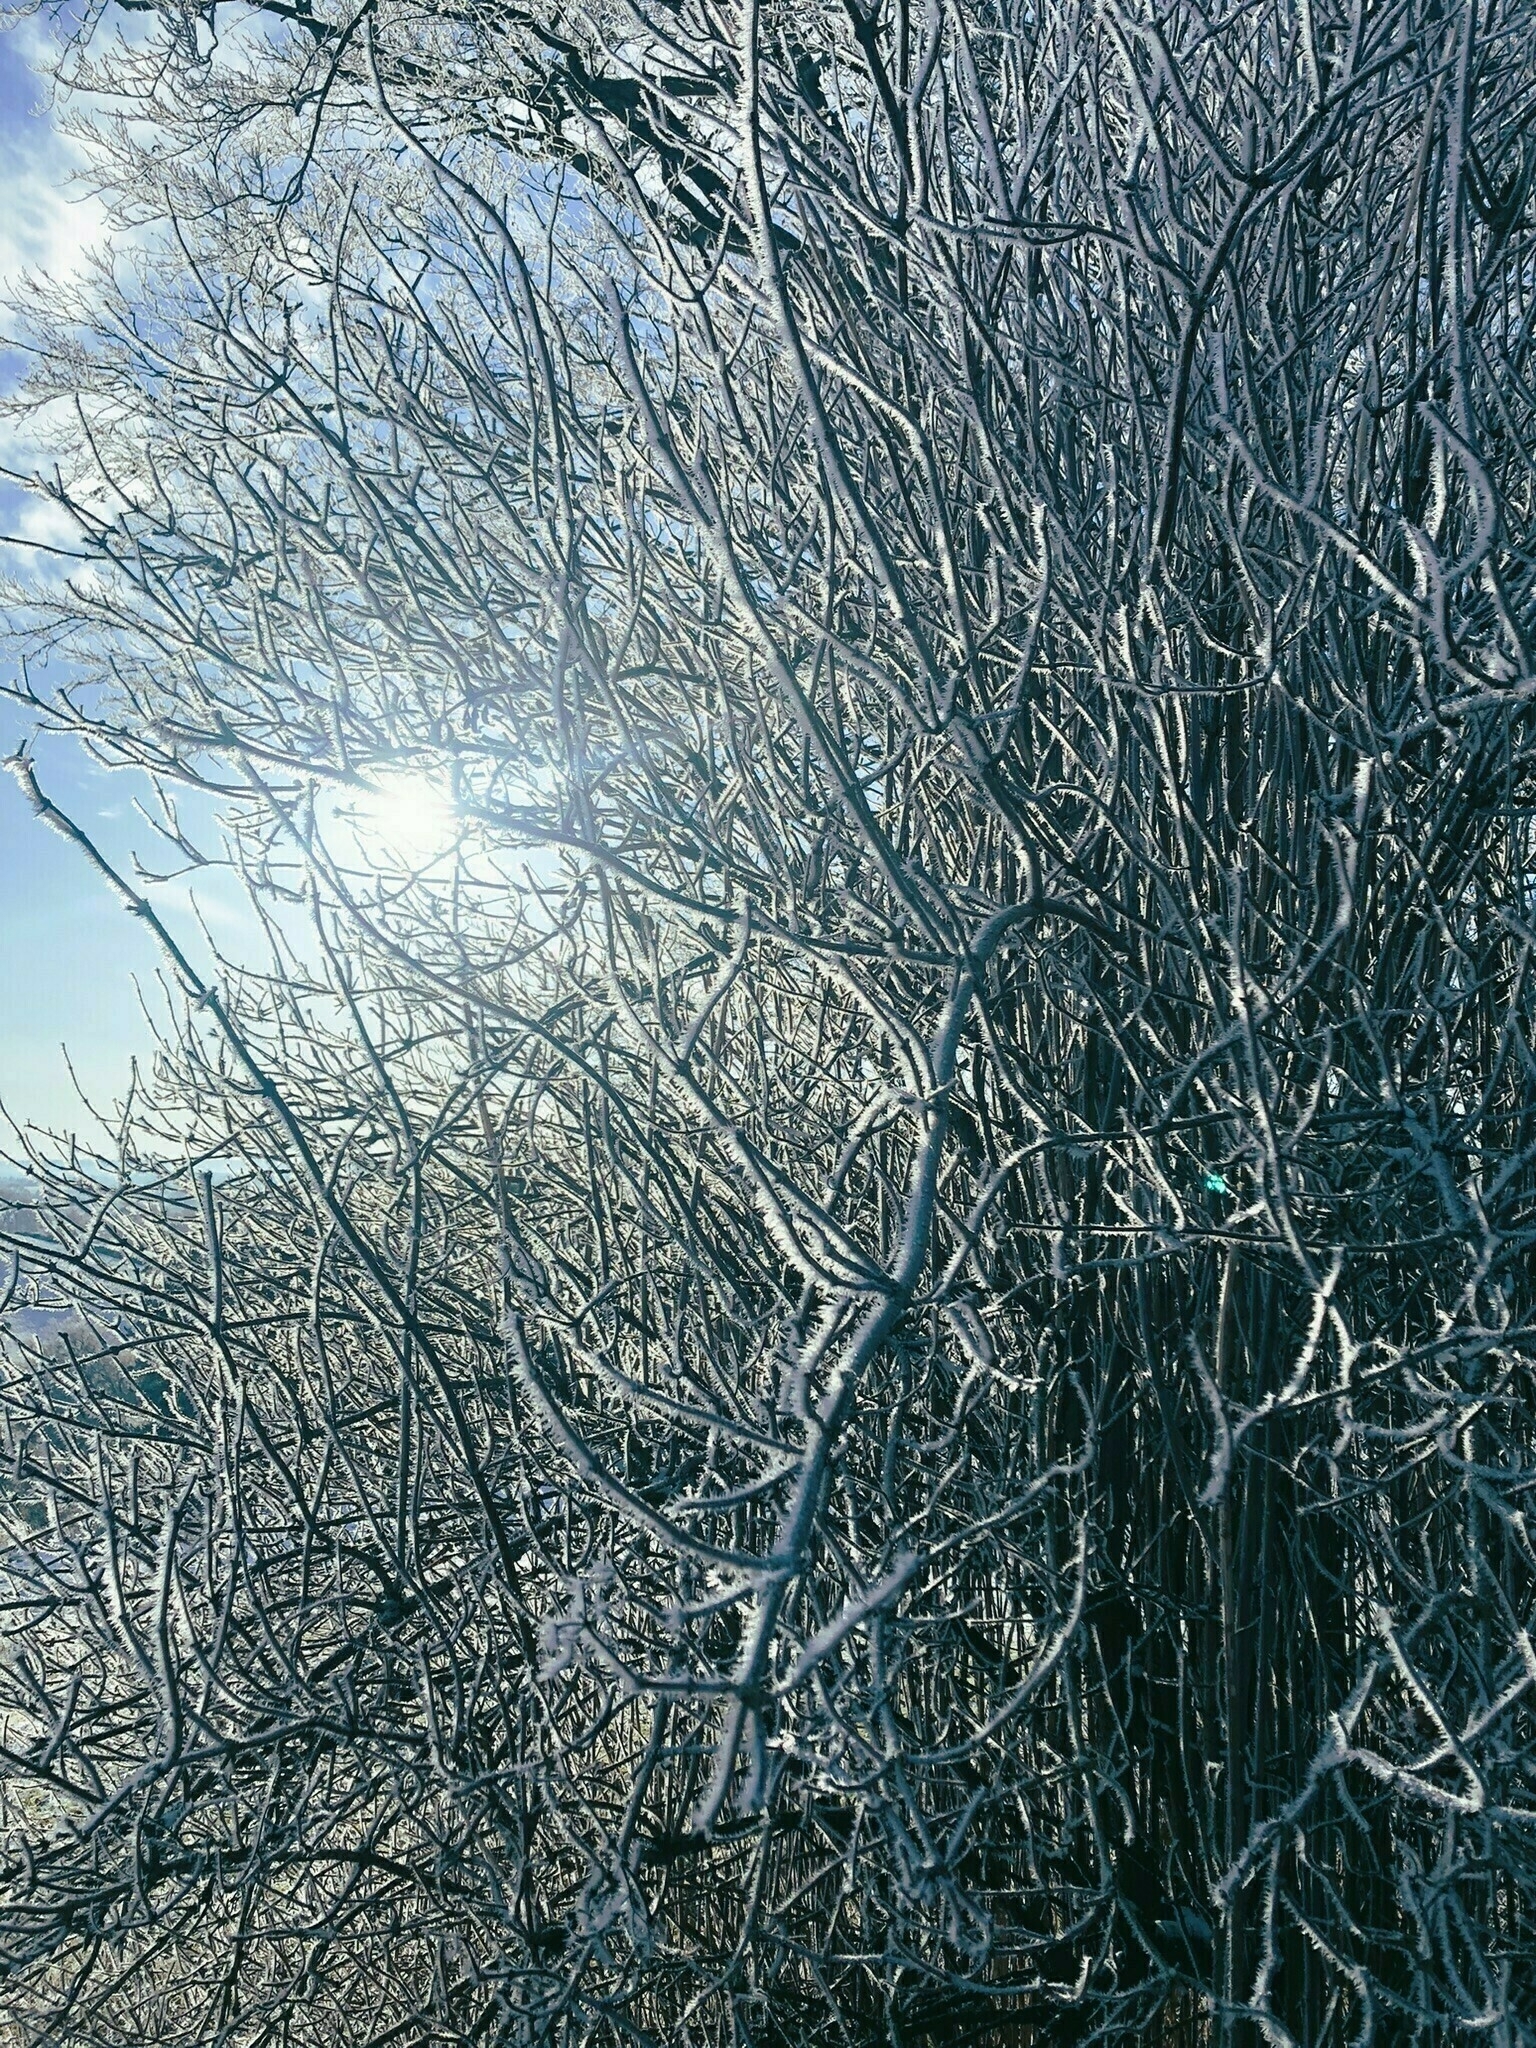 dappled sunlight shining through a bush in winter with hoarfrost on its stems